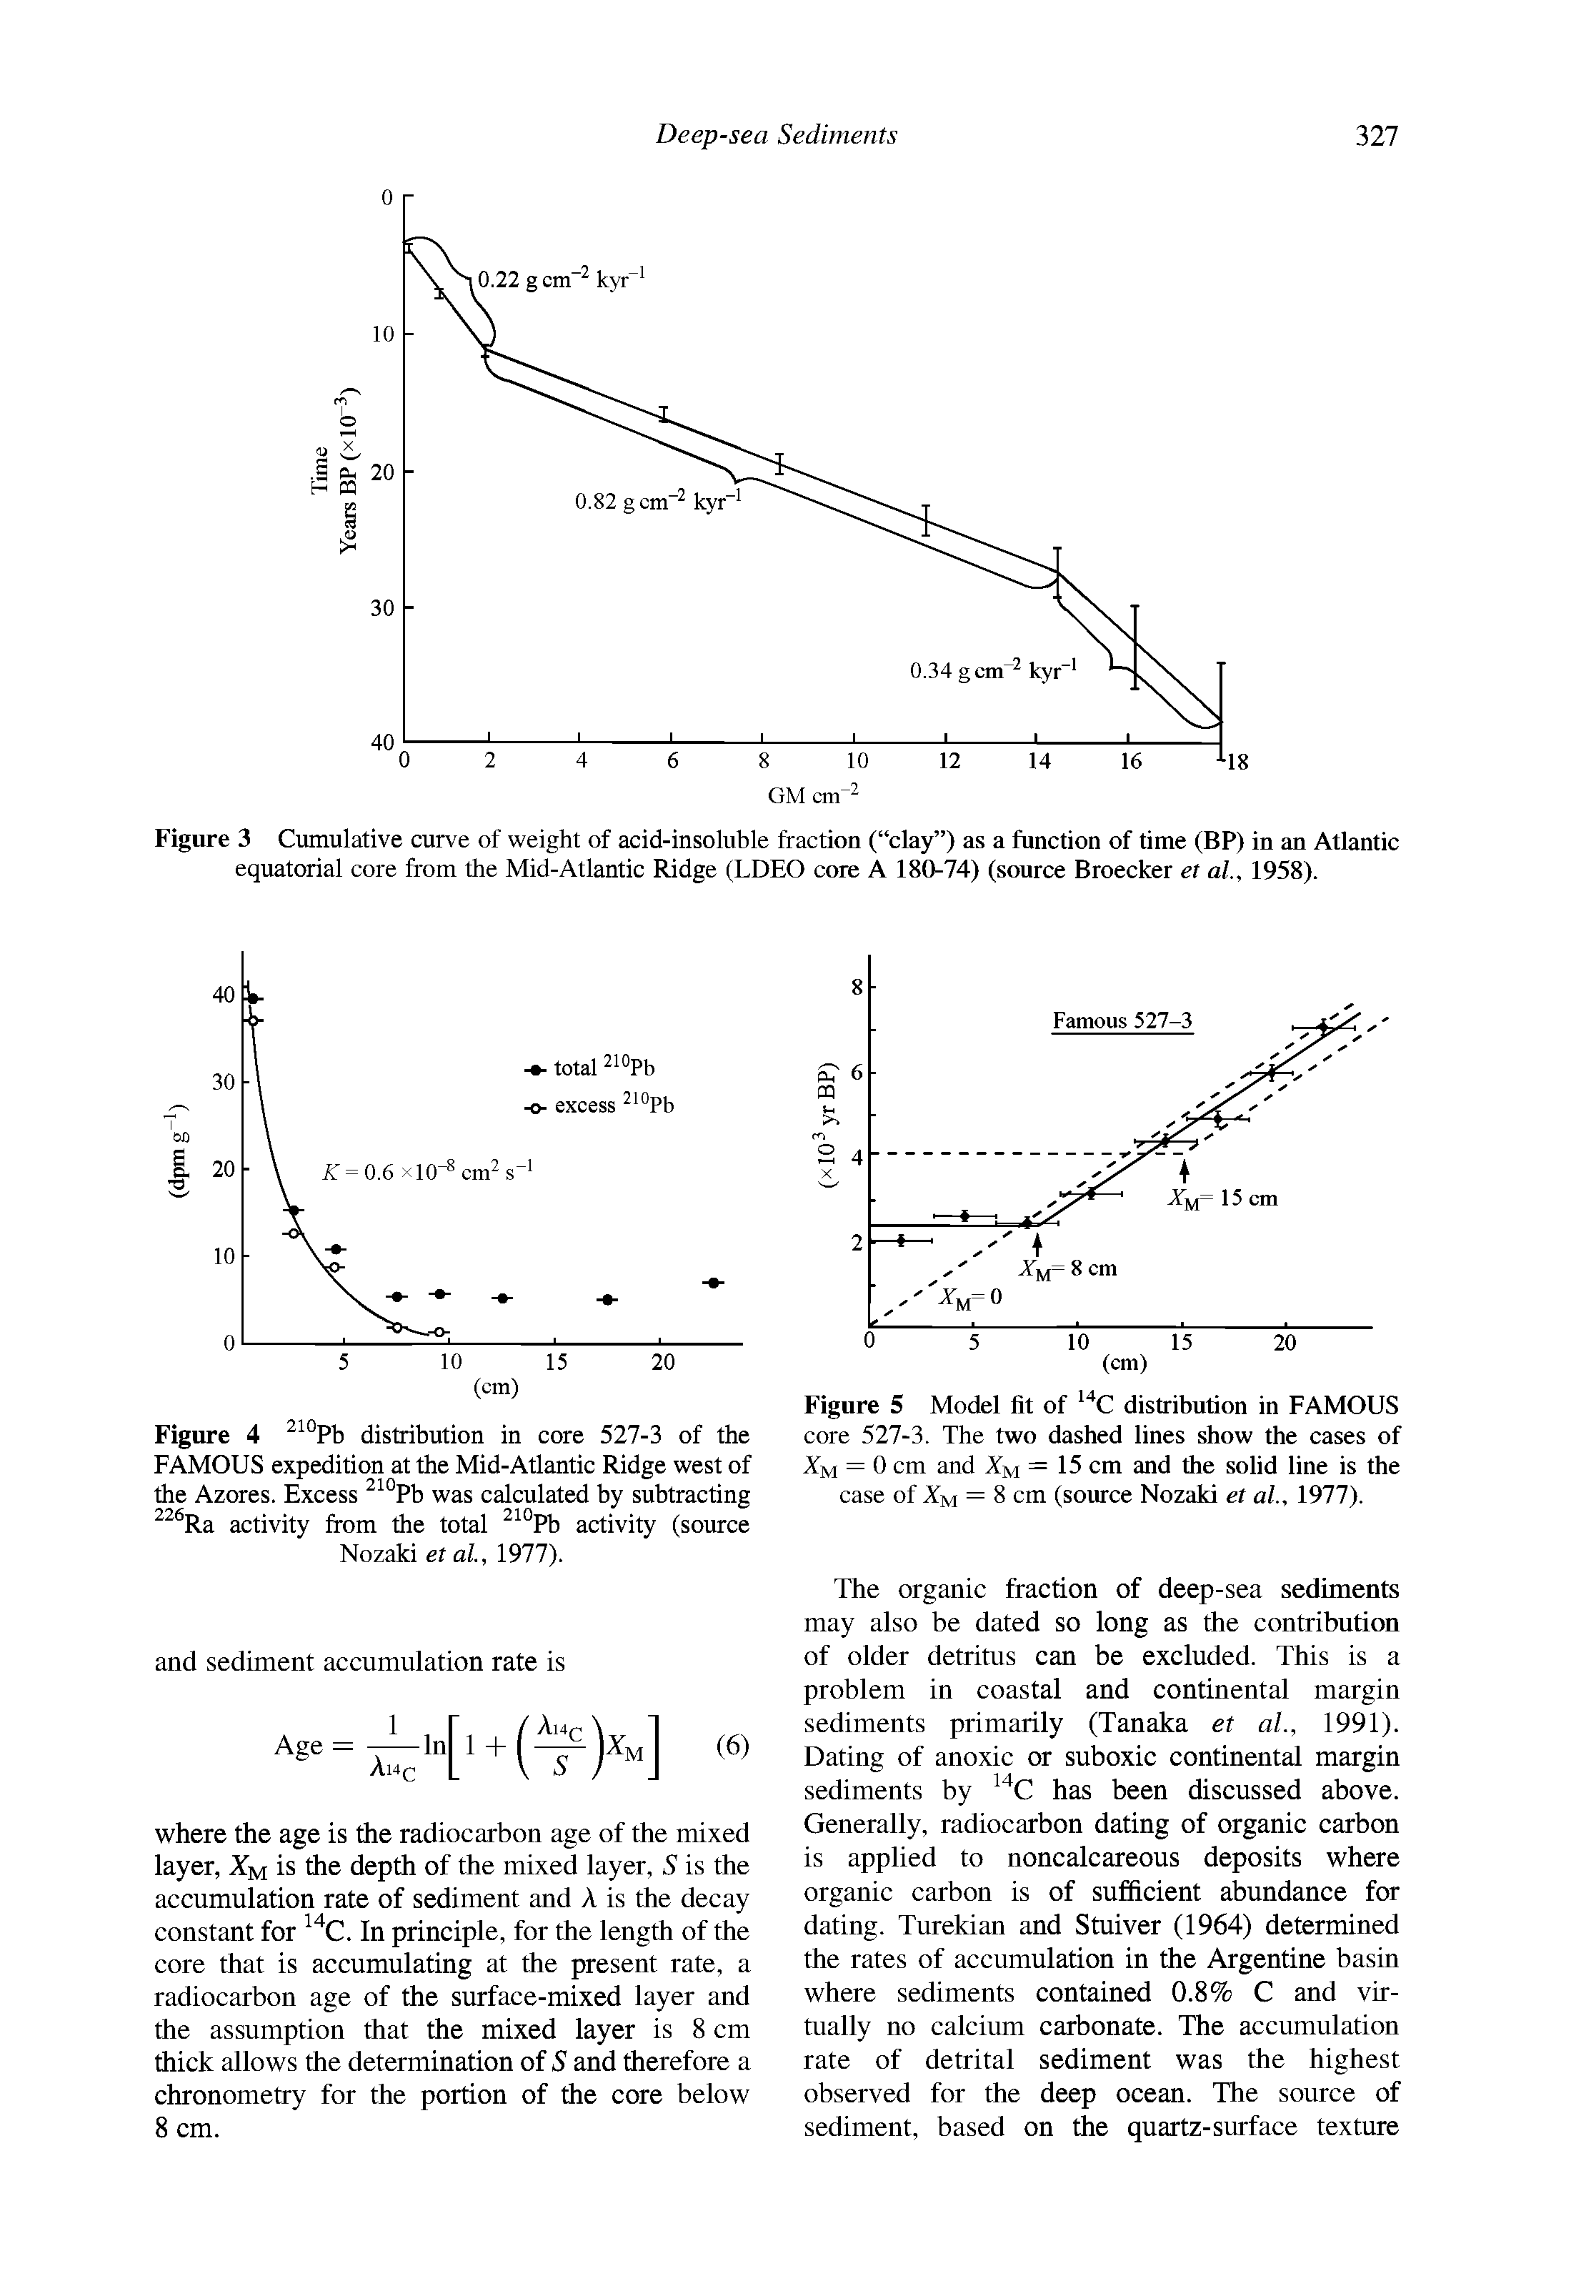 Figure 3 Cumulative curve of weight of acid-insoluble fraction ( clay ) as a function of time (BP) in an Atlantic equatorial core from the Mid-Atlantic Ridge (LDEO core A 180-74) (source Broecker et al, 1958).